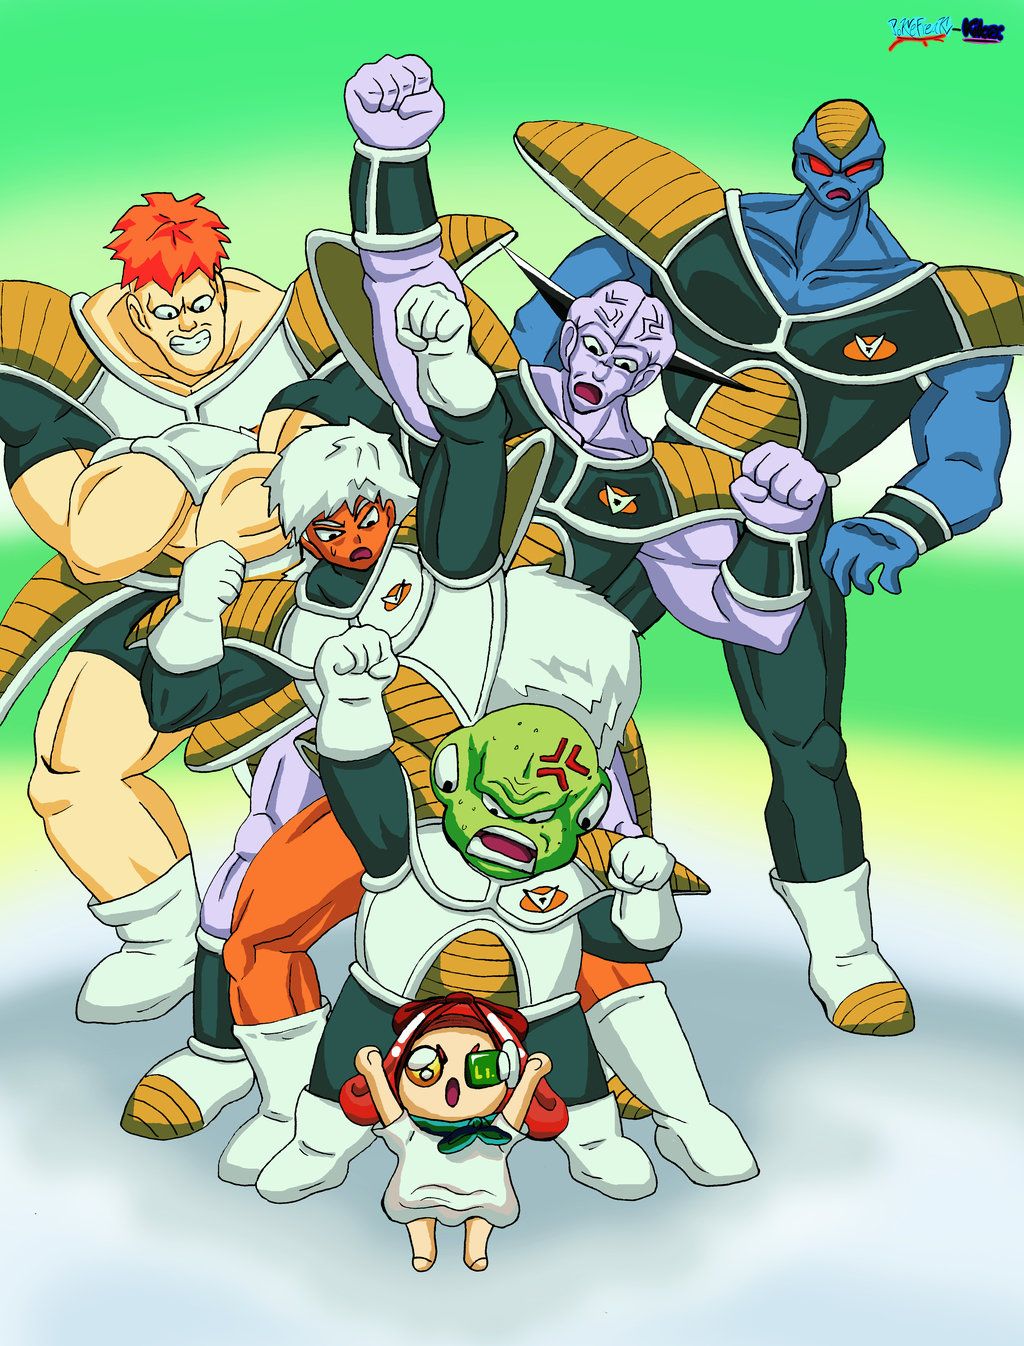 A Day with the Ginyu Force! by PokeFreak-Kiko on DeviantArt